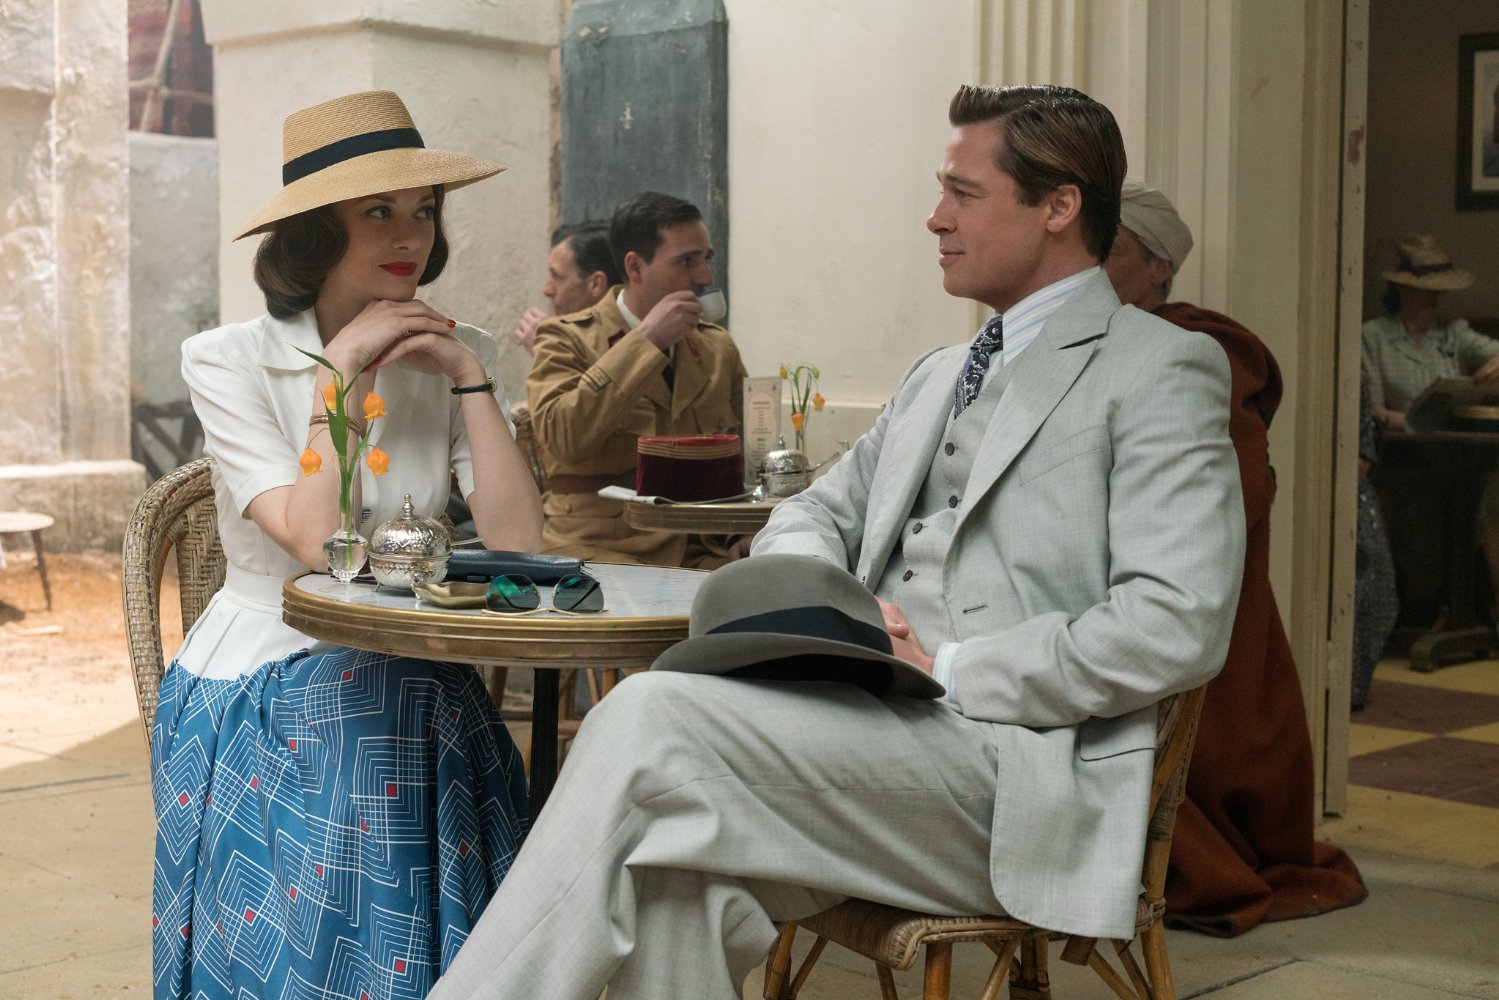 ALLIED Secures Some Pulpy Thrills, But the Drama Falls Flat